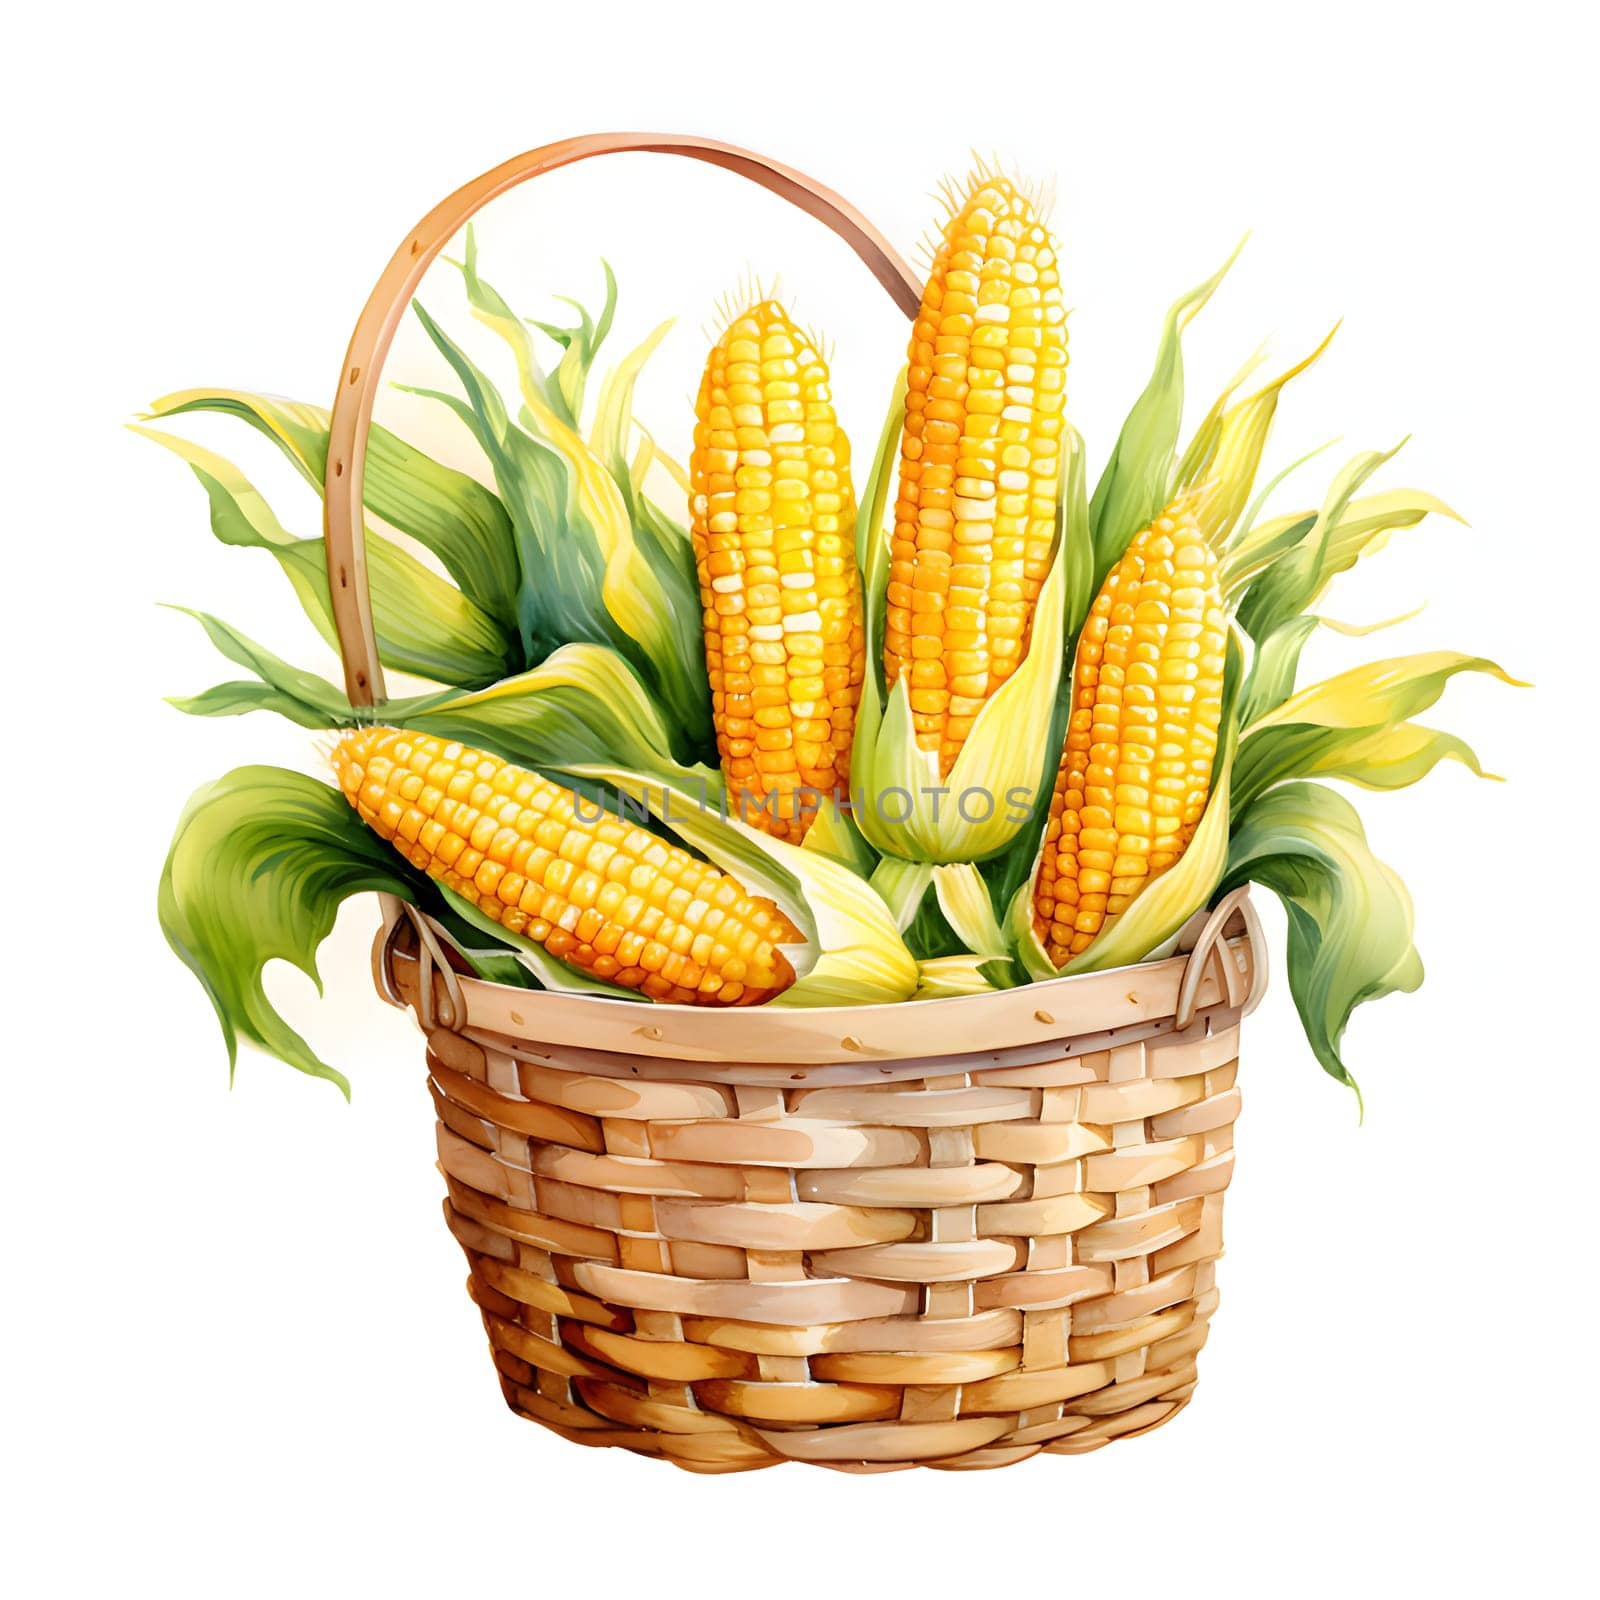 Illustration of a wicker basket and in it yellow corn cobs with leaves. Corn as a dish of thanksgiving for the harvest, a picture on a white isolated background. An atmosphere of joy and celebration.